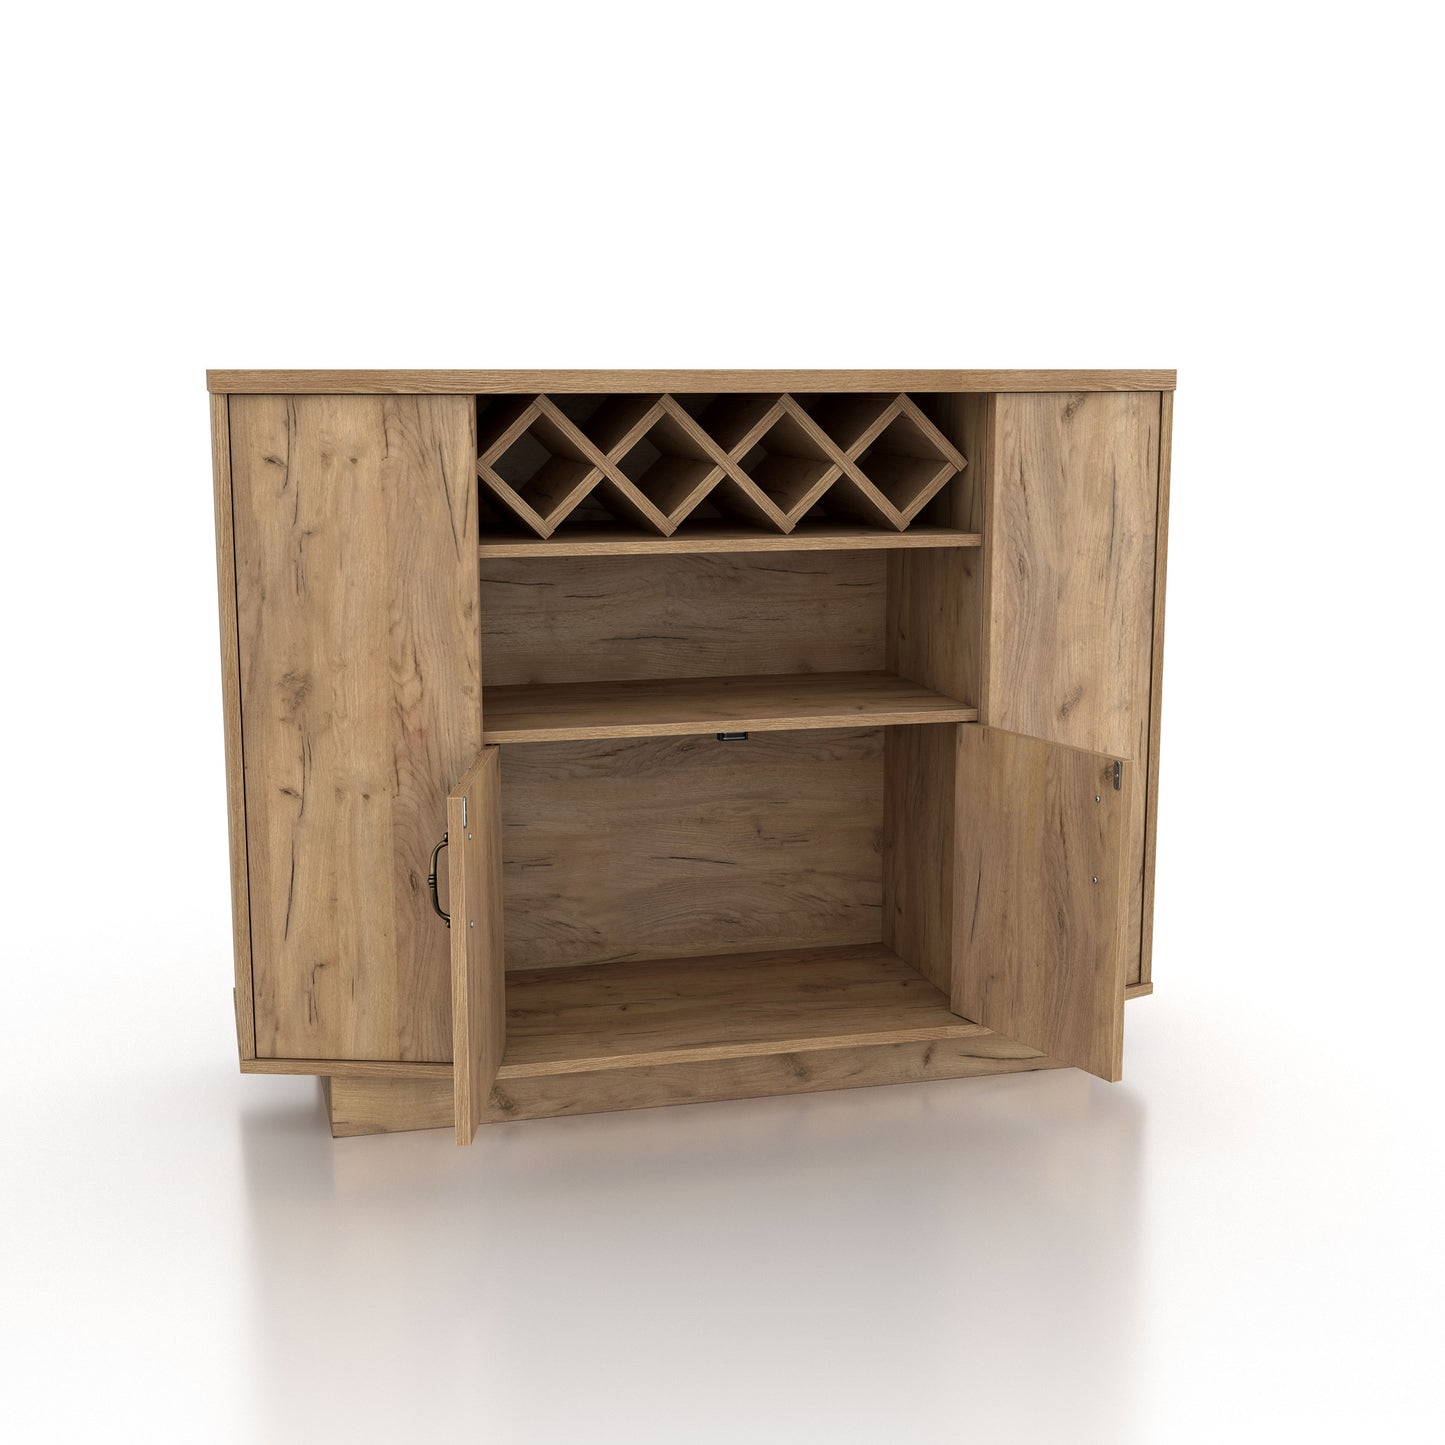 Right angled farmhouse light oak four-shelf lattice wine cabinet with bottle storage and center doors open on a white background